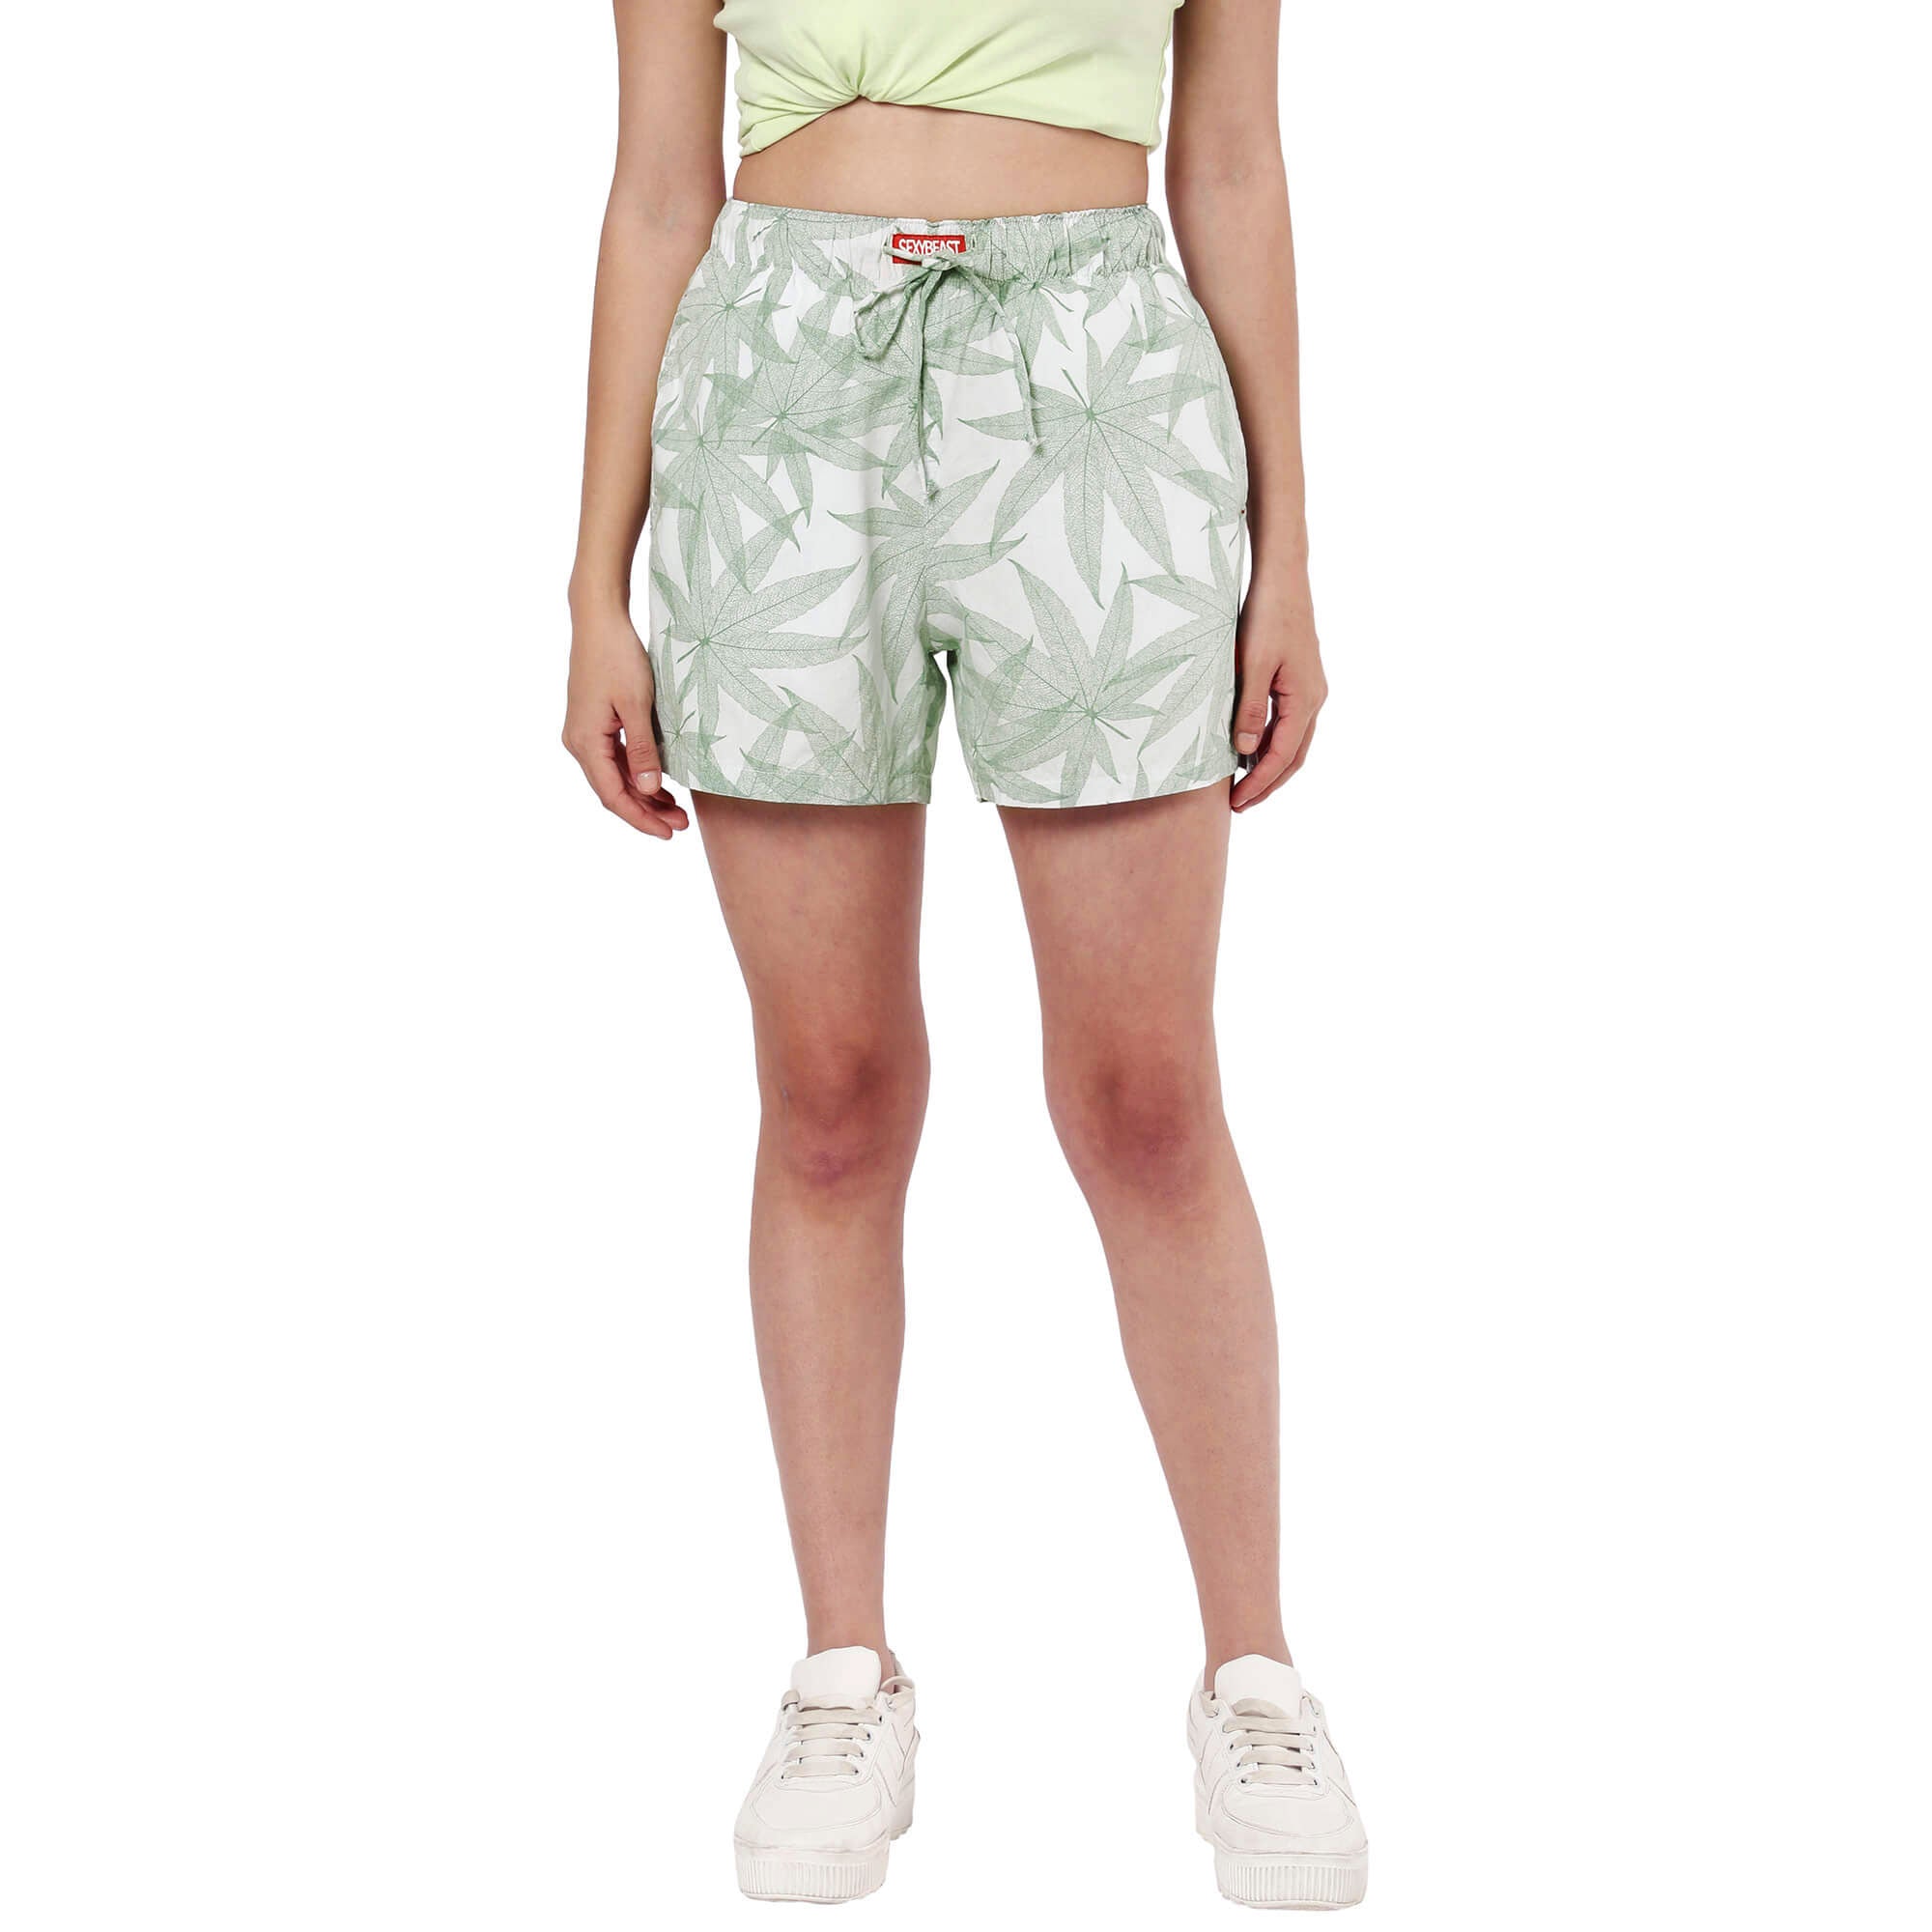 Funky Printed Shorts for Women